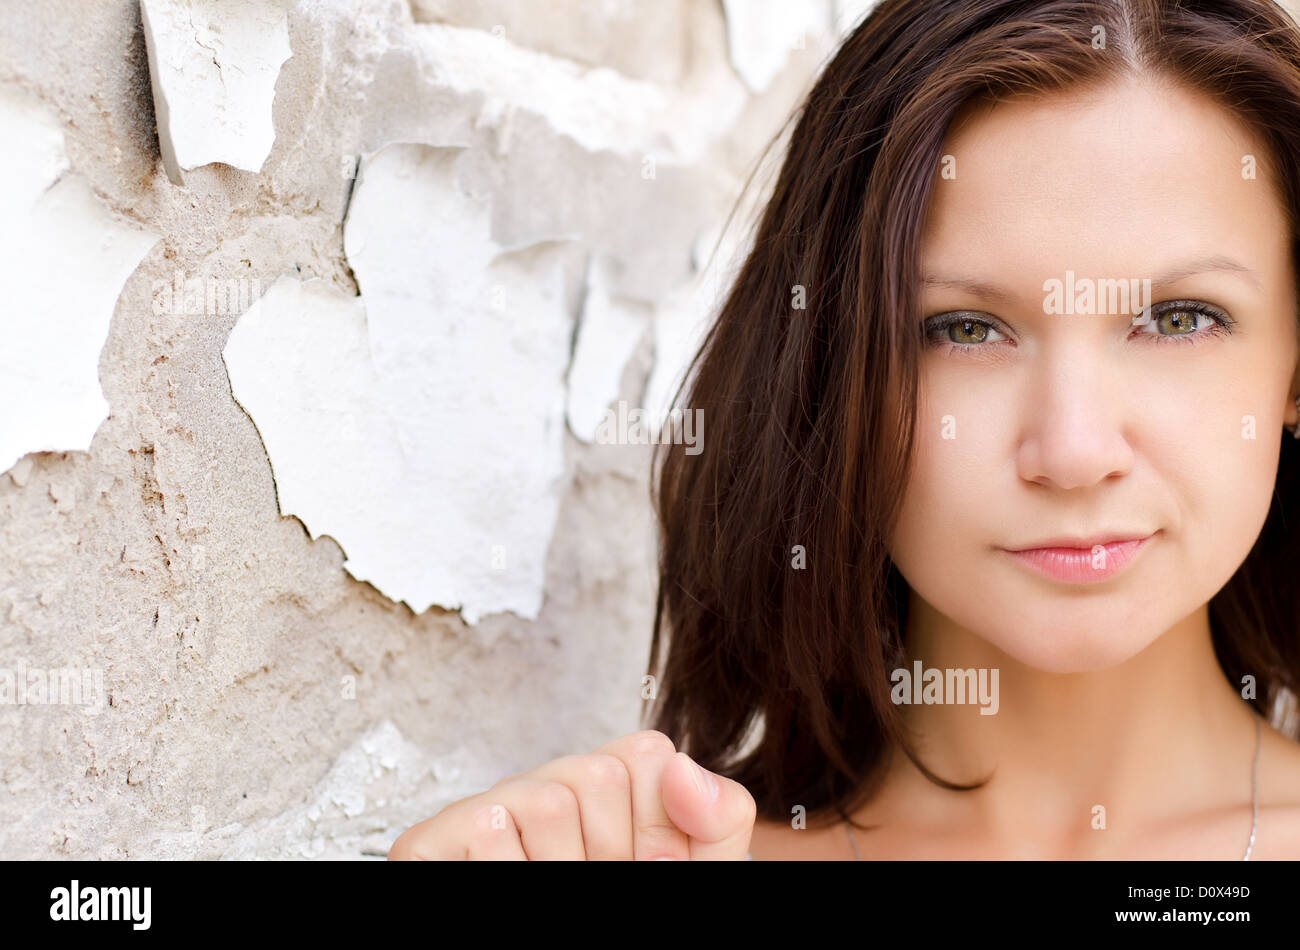 Headshot of a beautiful woman posing againsta grunge wall with peeling paint and exposed concrete Stock Photo